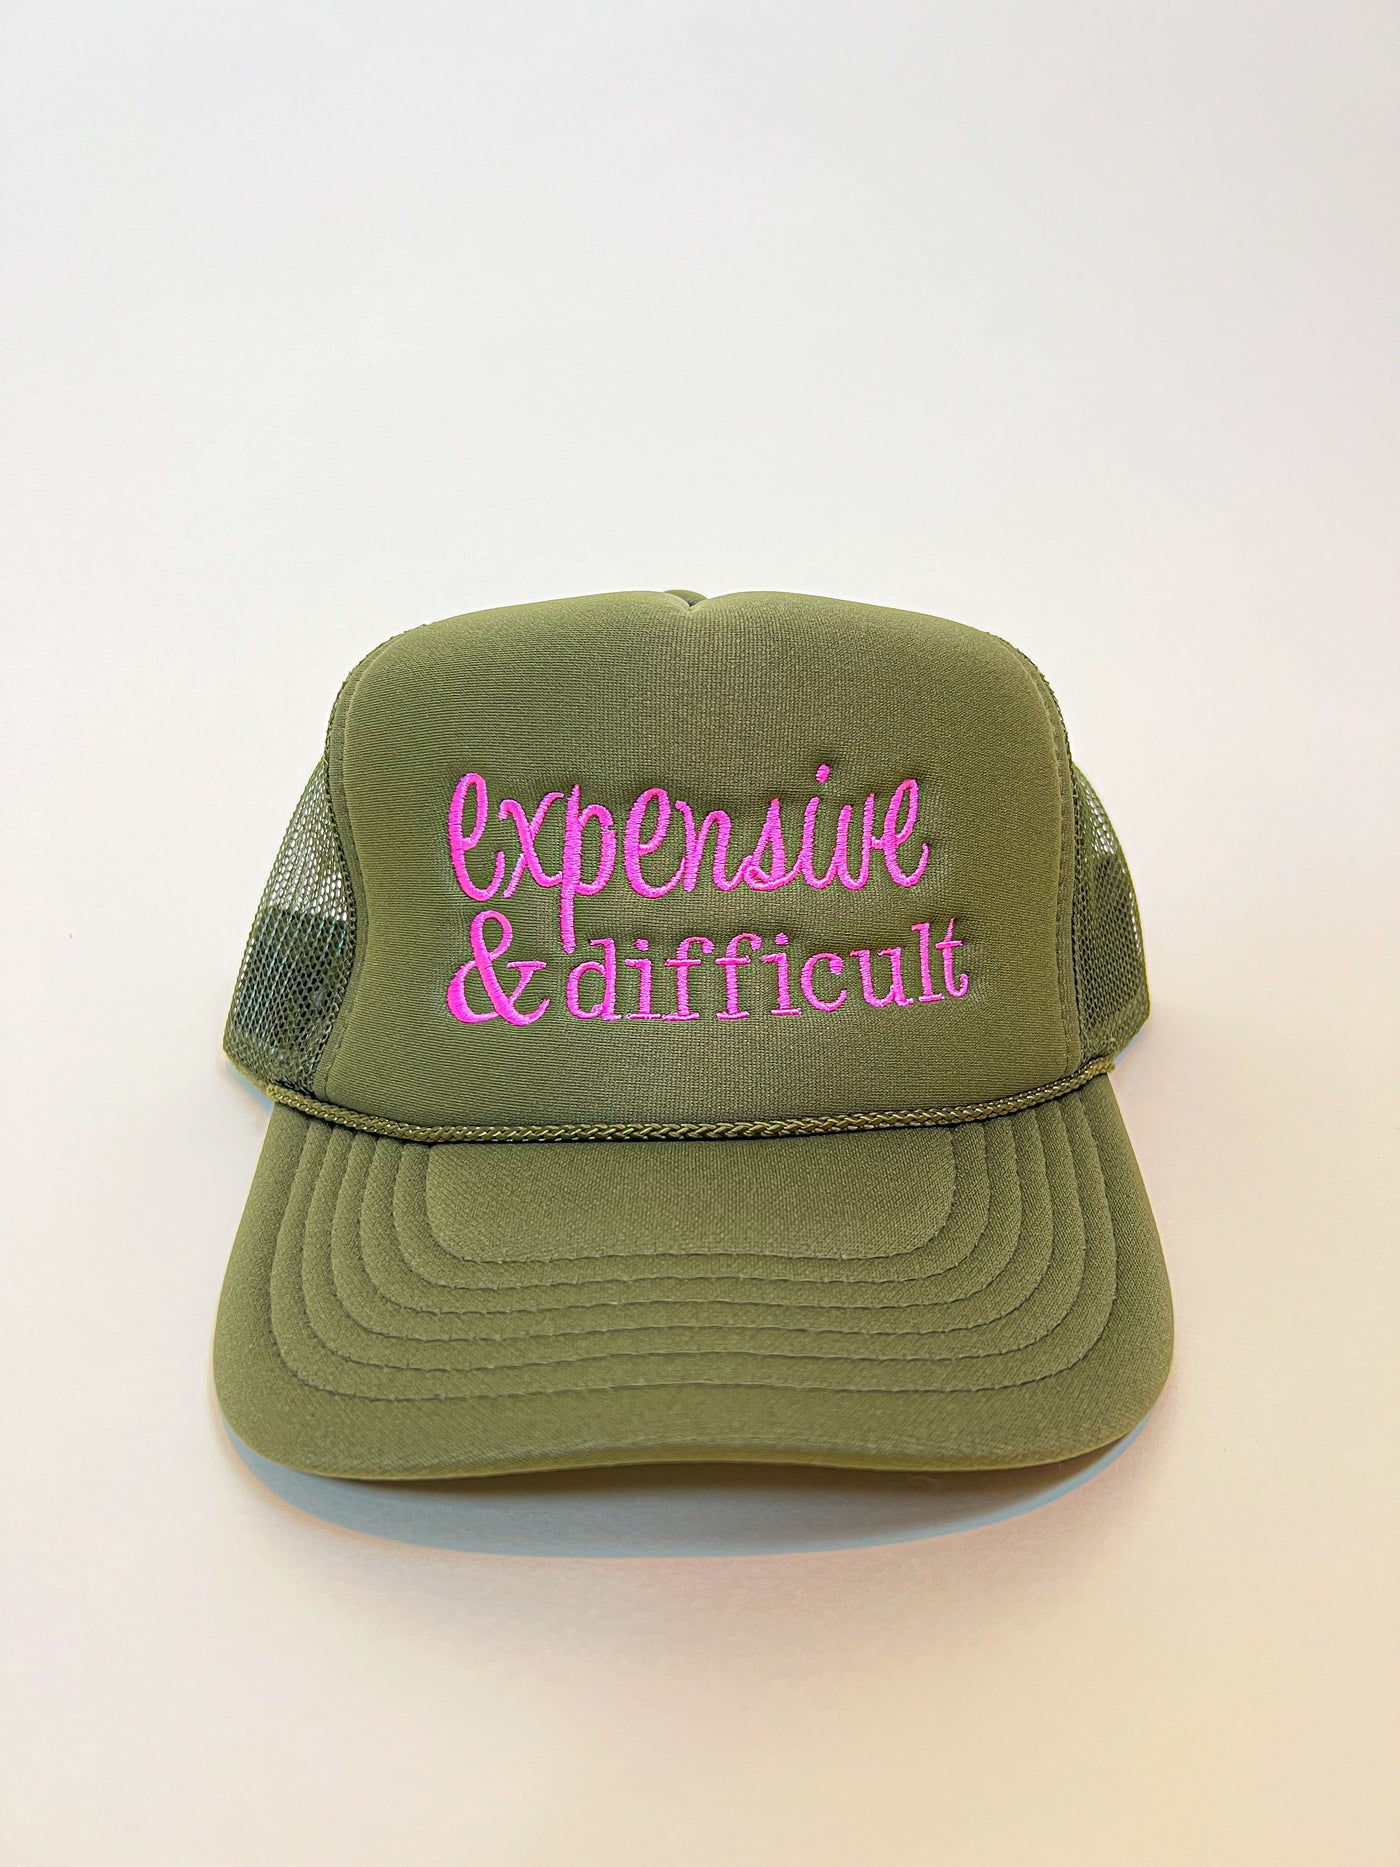 Expensive & Difficult Trucker Hat